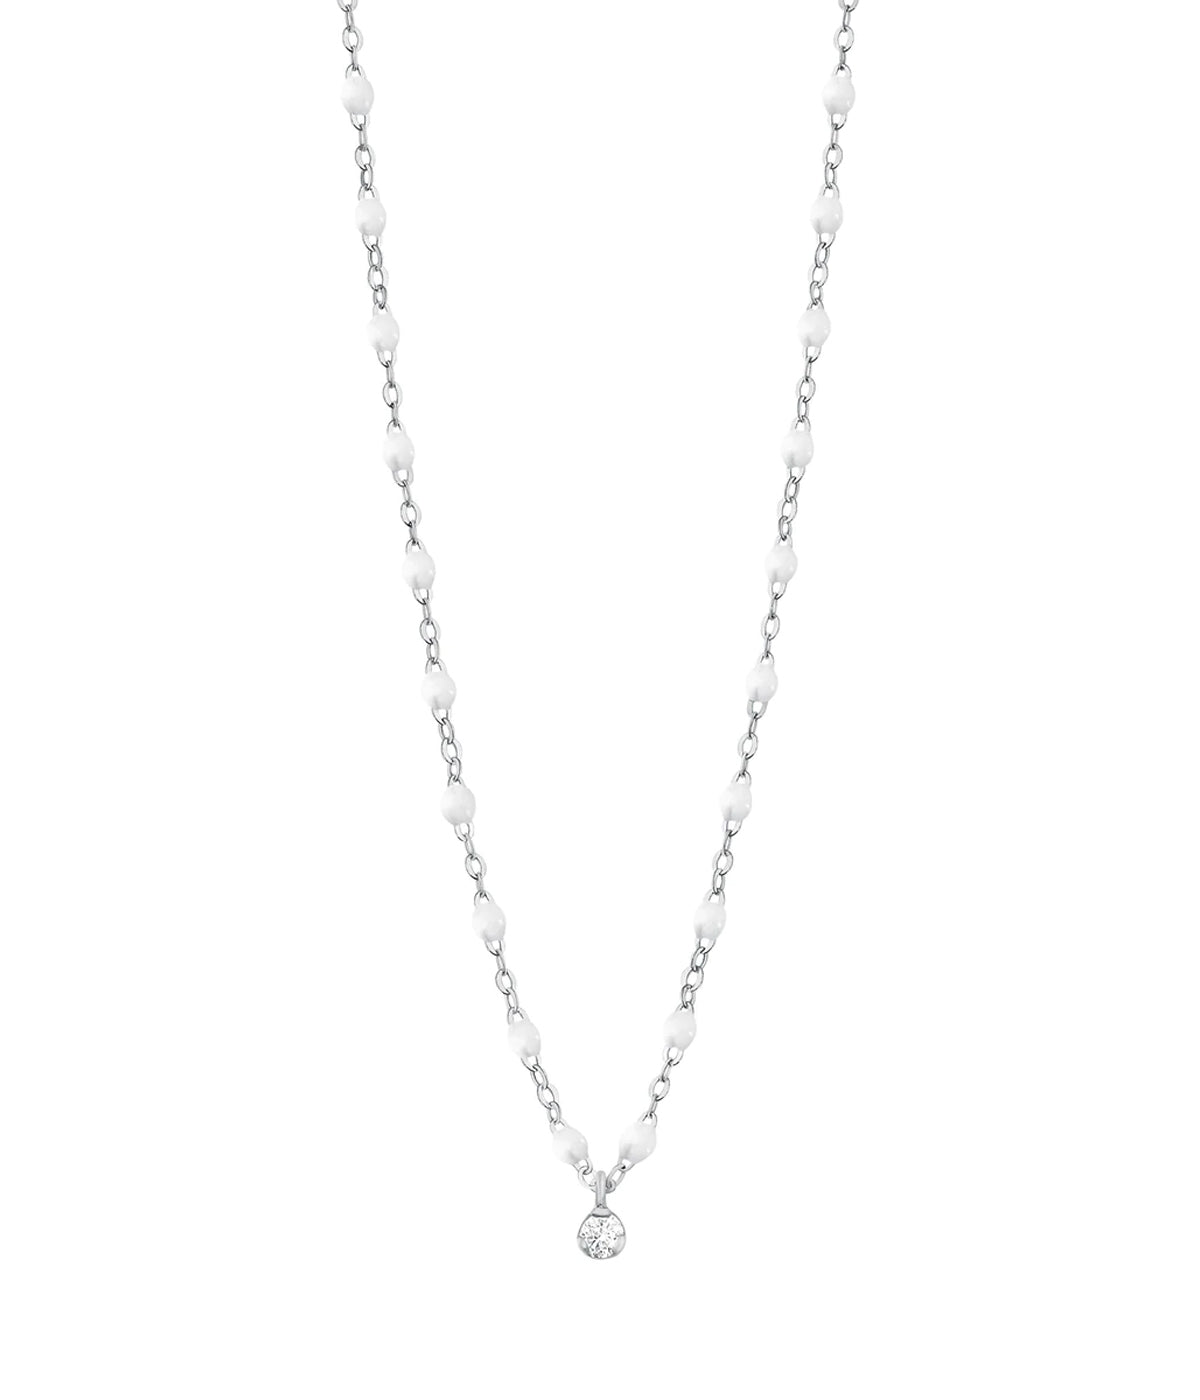 An 18K white gold necklace centered by a round-cut glittering diamond pendant. Hand made dainty chain interspersed with white resin beads. An elegant jewellery item, perfect for pairing or layering. 